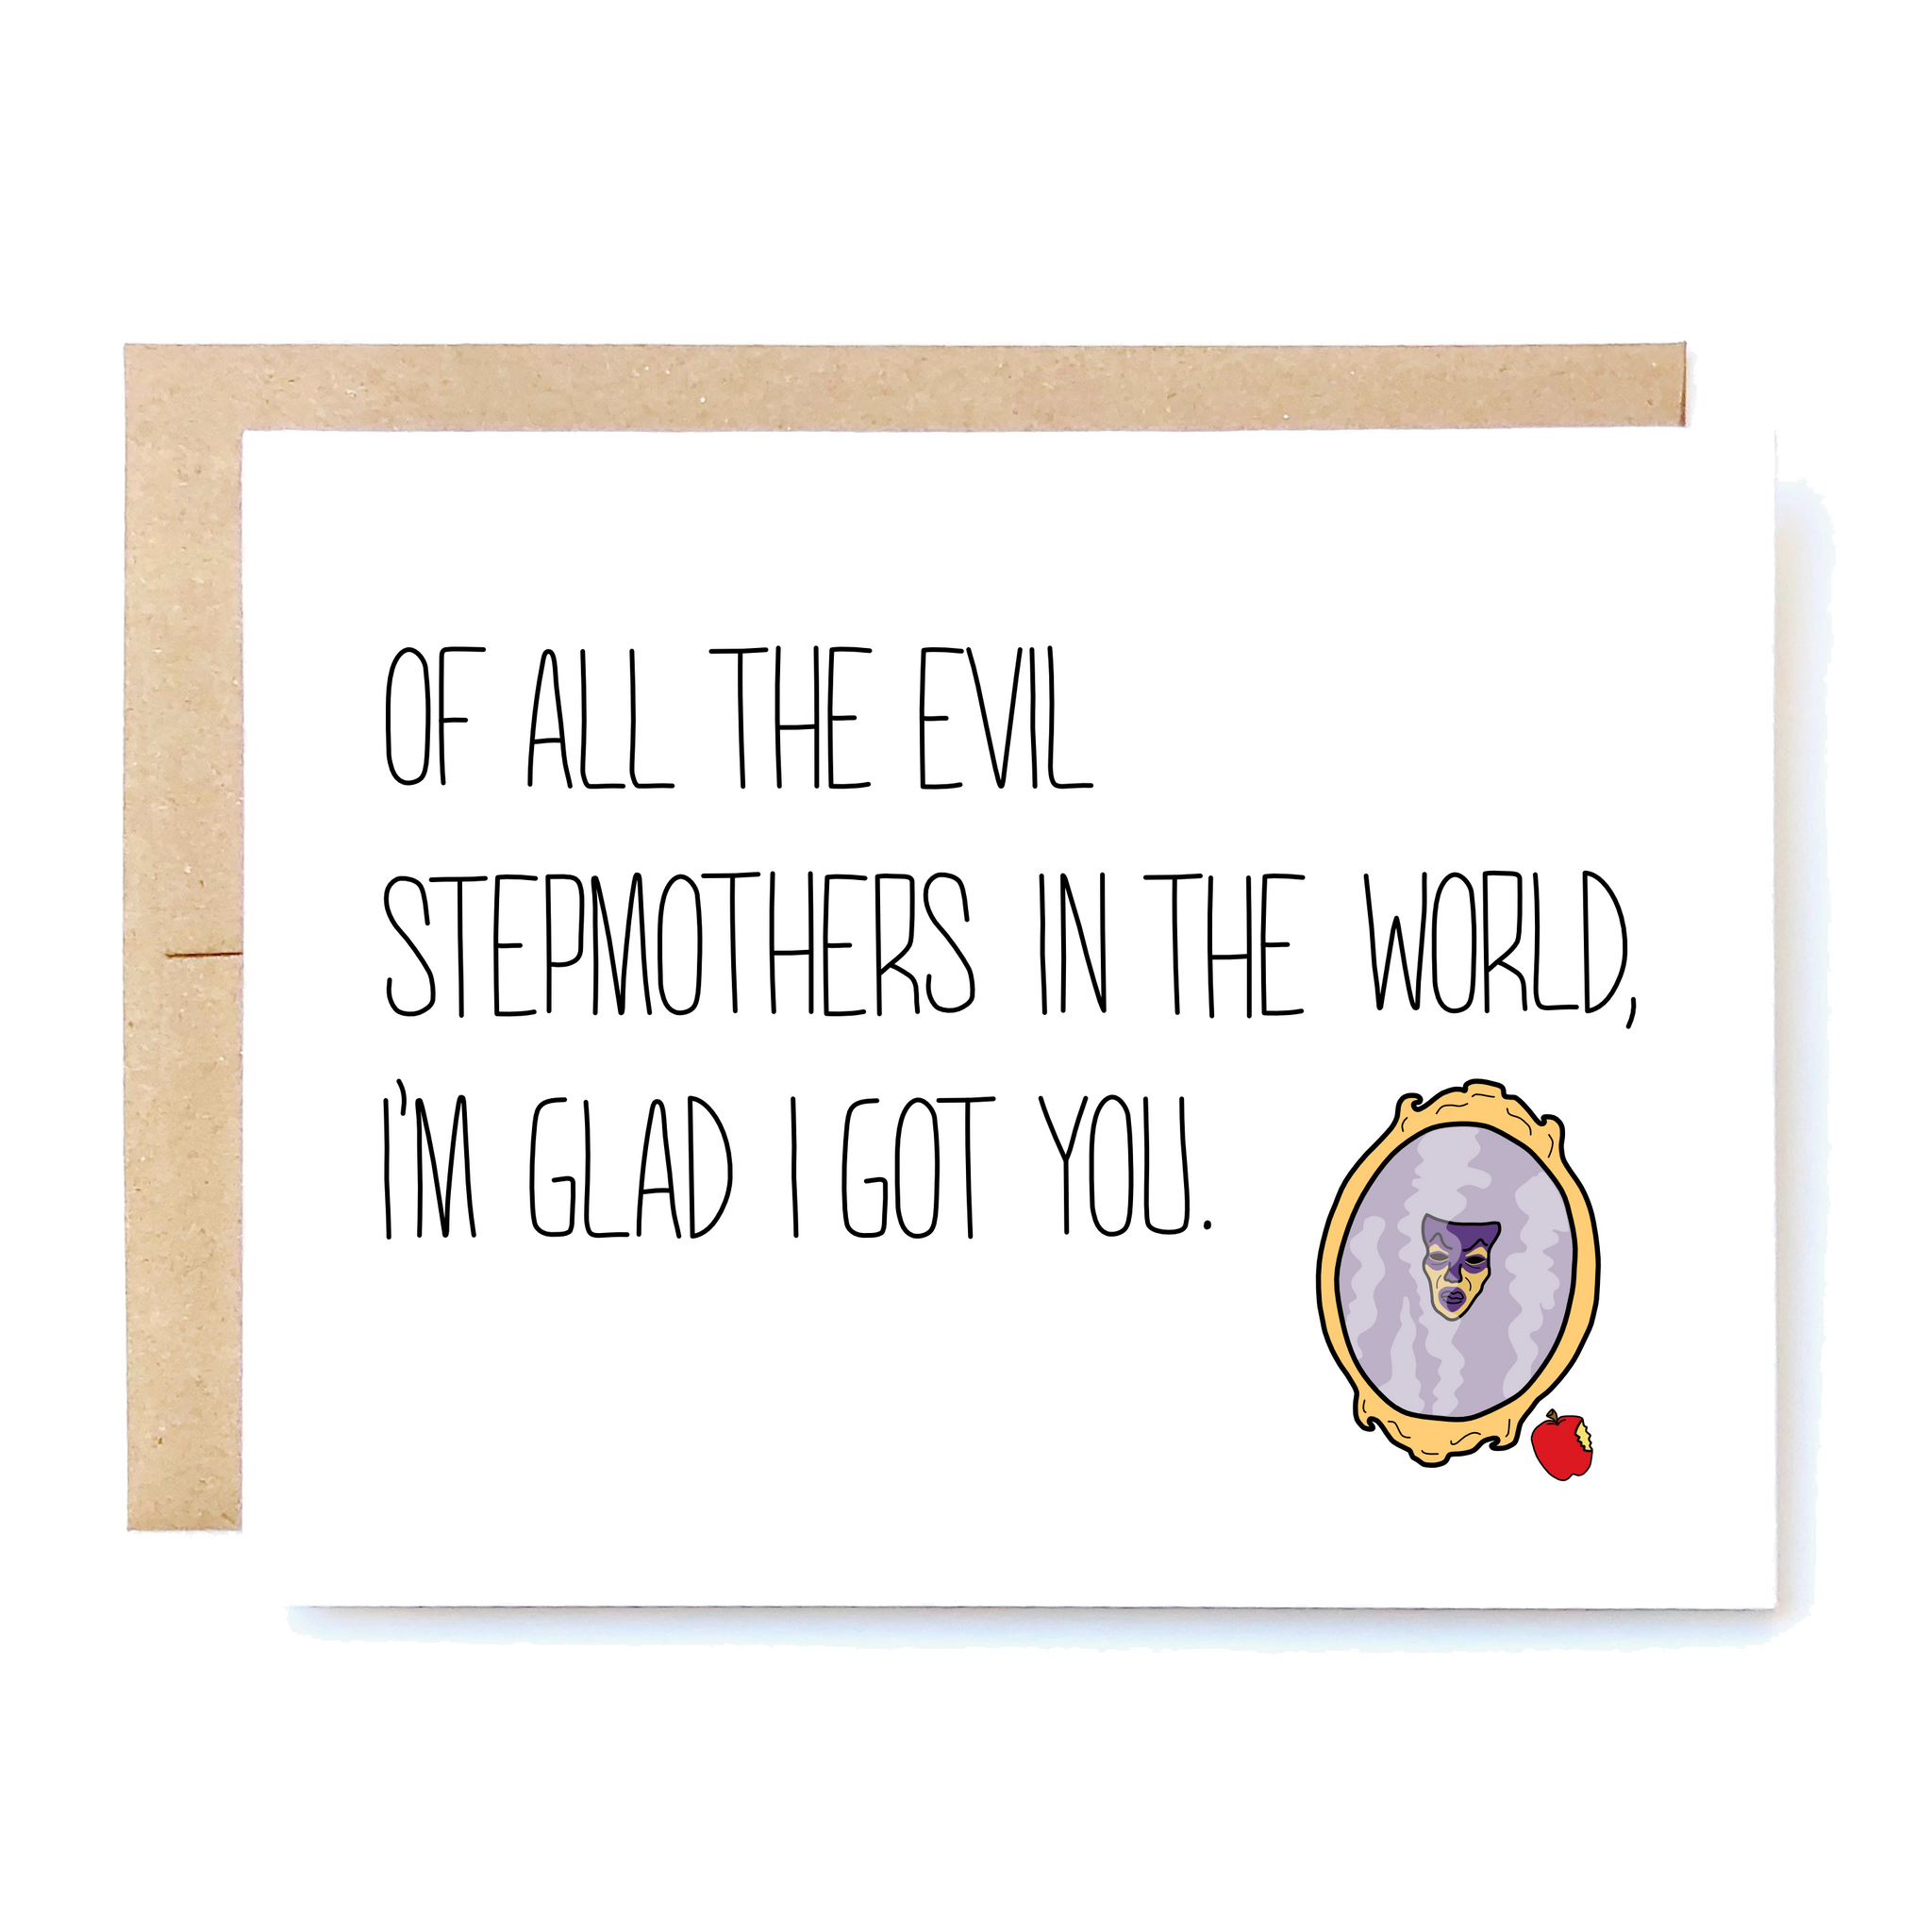 Card Front: Of all the evil stepmothers in the world, I'm glad I got you.